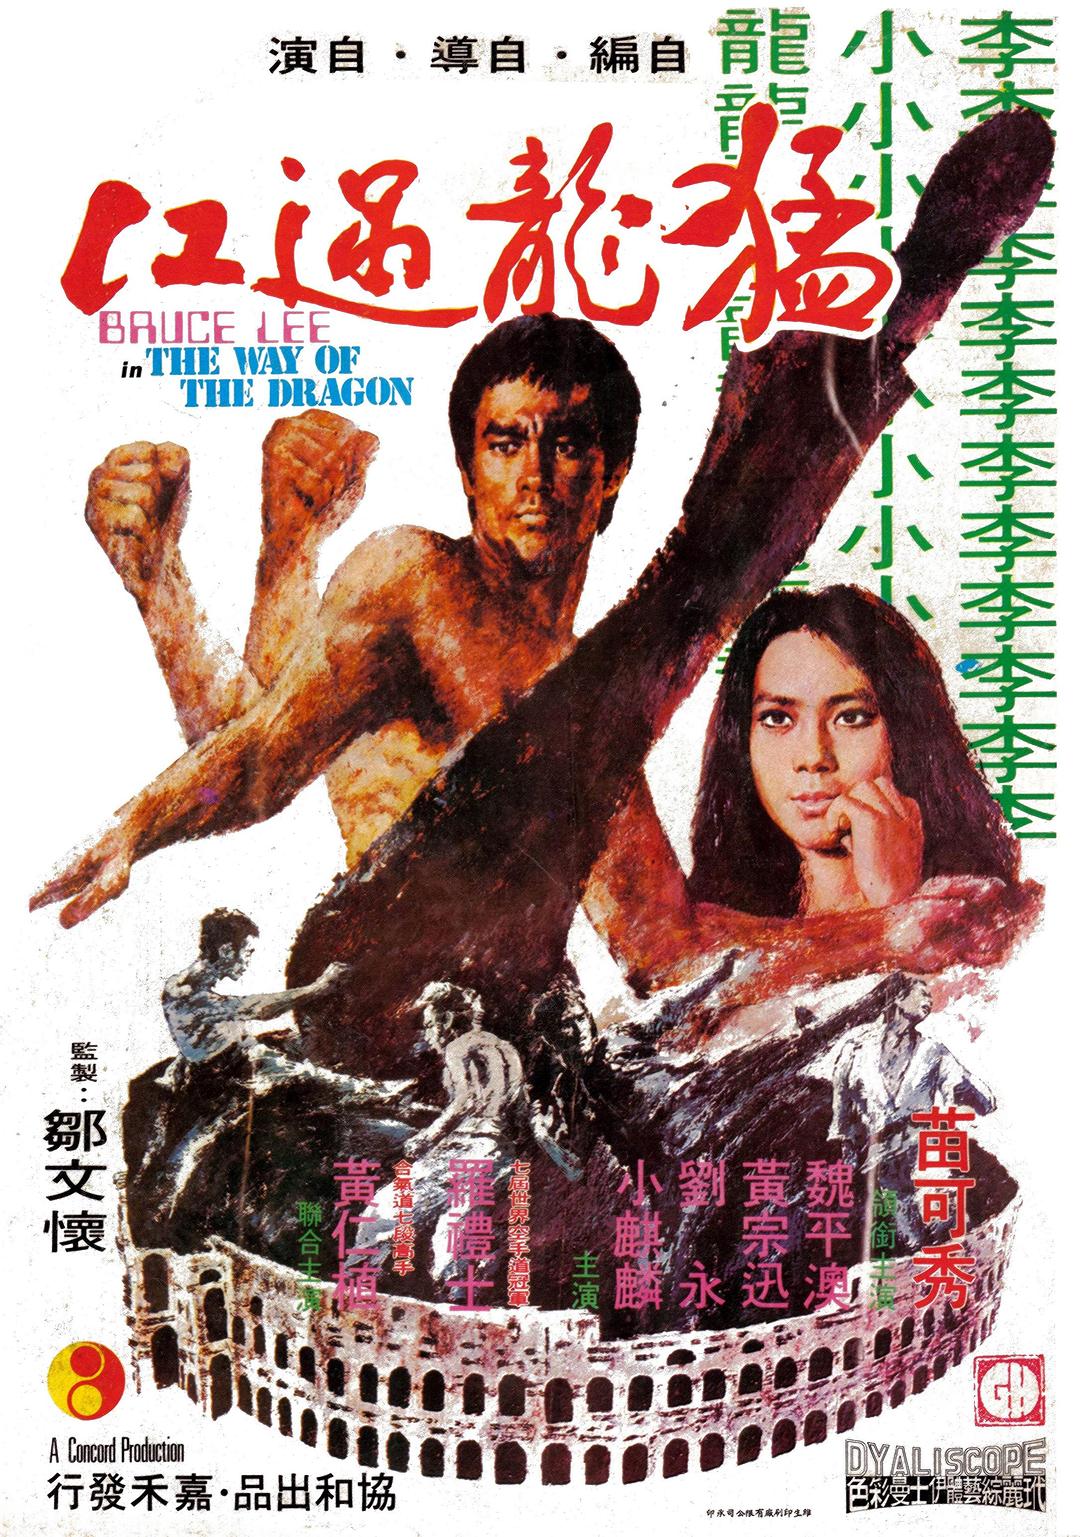 ^ The.Way.Of.The.Dragon.1972.REMASTERED.1080p.BluRay.x264-PSYCHD 9.84GB-1.png